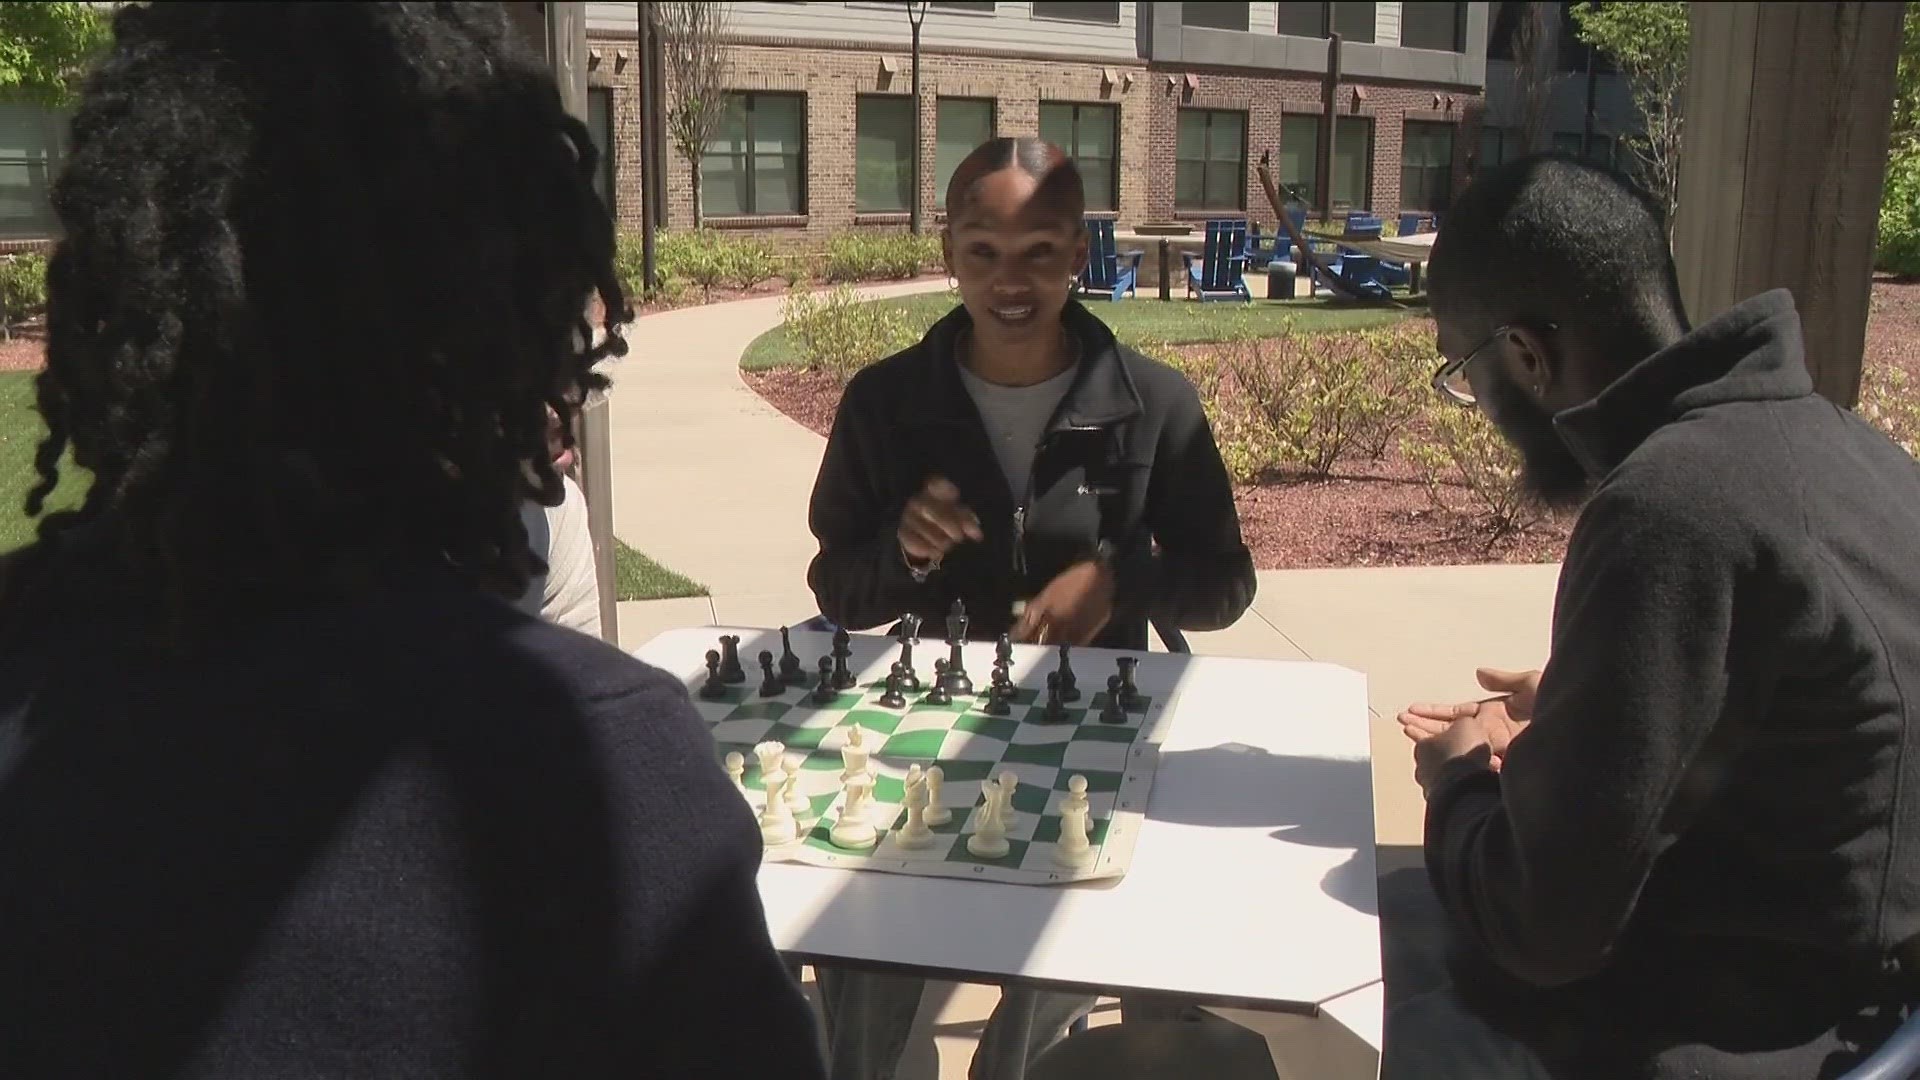 11Alive's Rarione Maniece spoke to some of the students who will be competing.